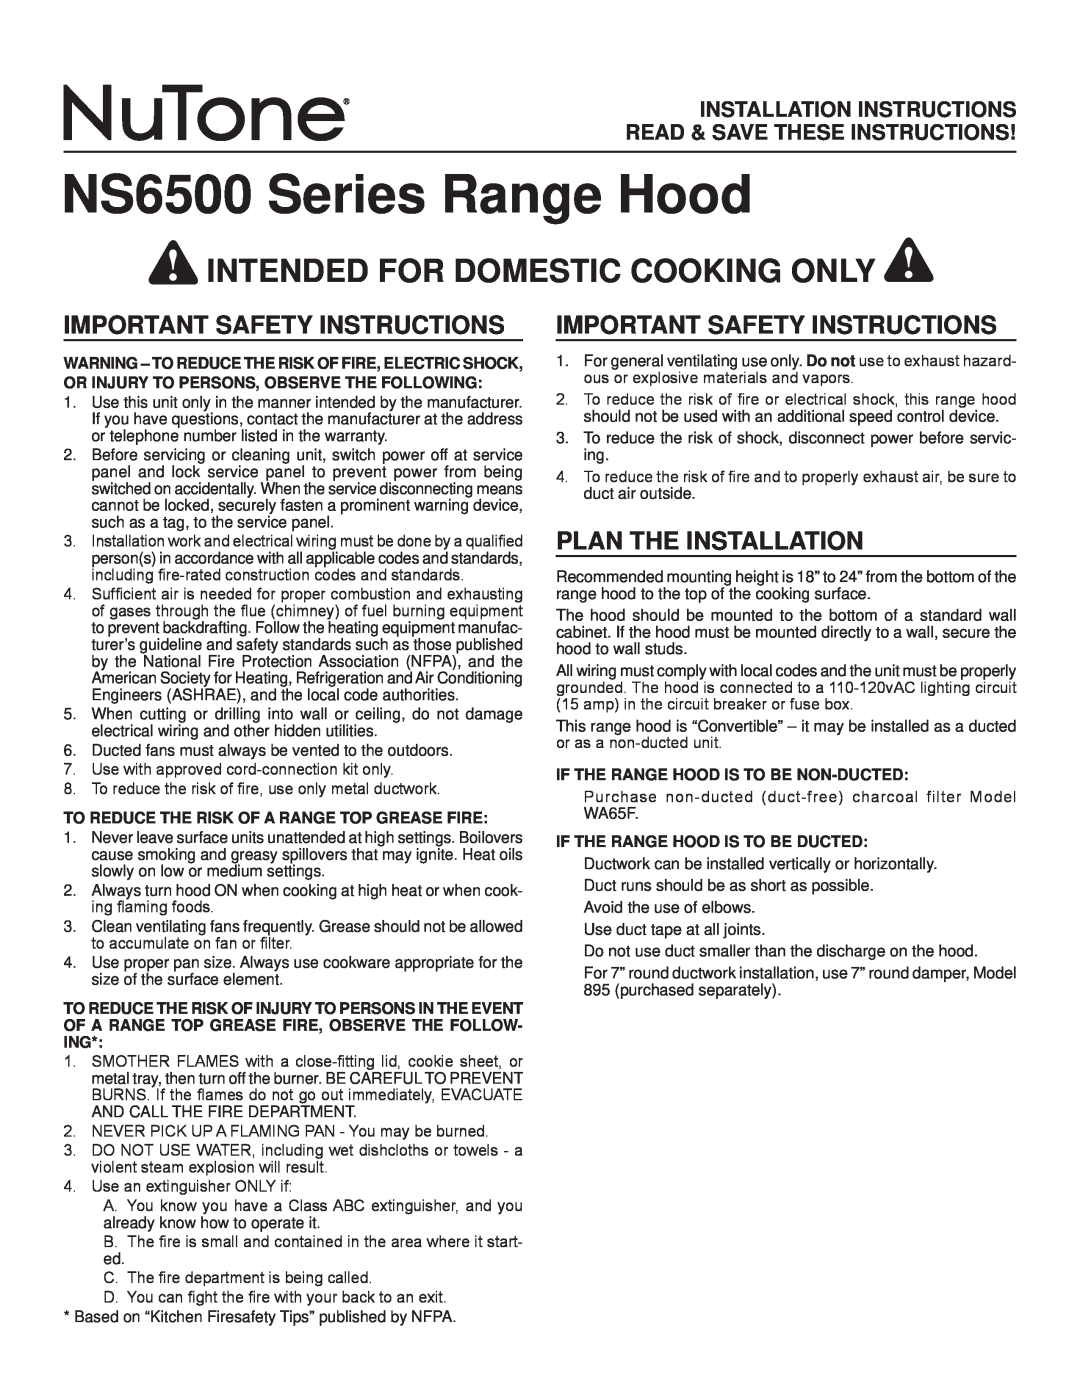 NuTone installation instructions NS6500 Series Range Hood, Important Safety Instructions, Plan The Installation 